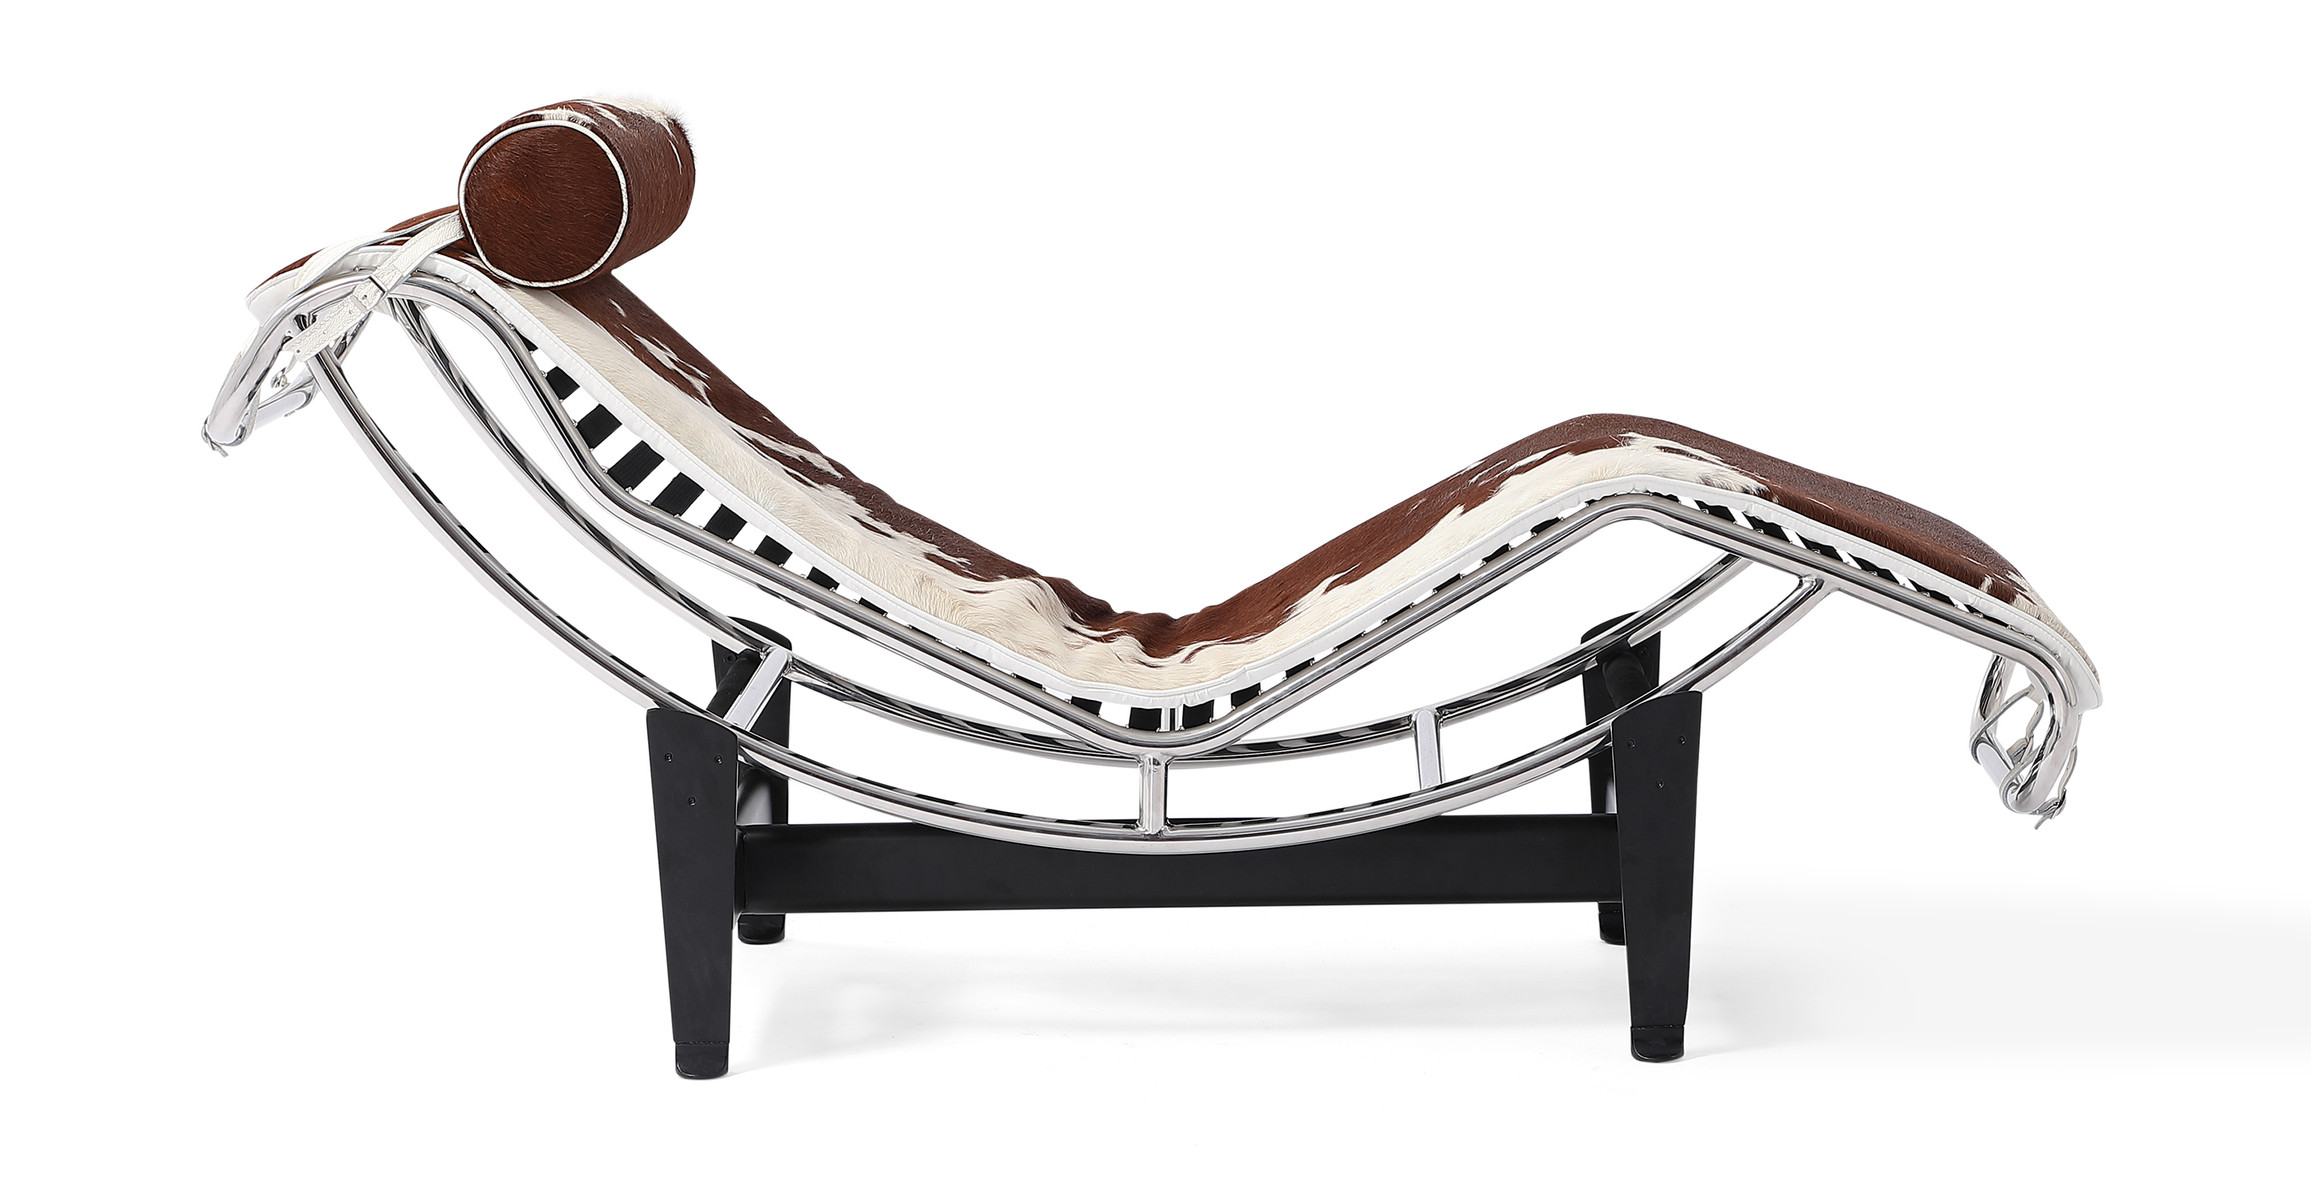 LC4 Pony lounge chair black and white 2 - Le Corbusier and